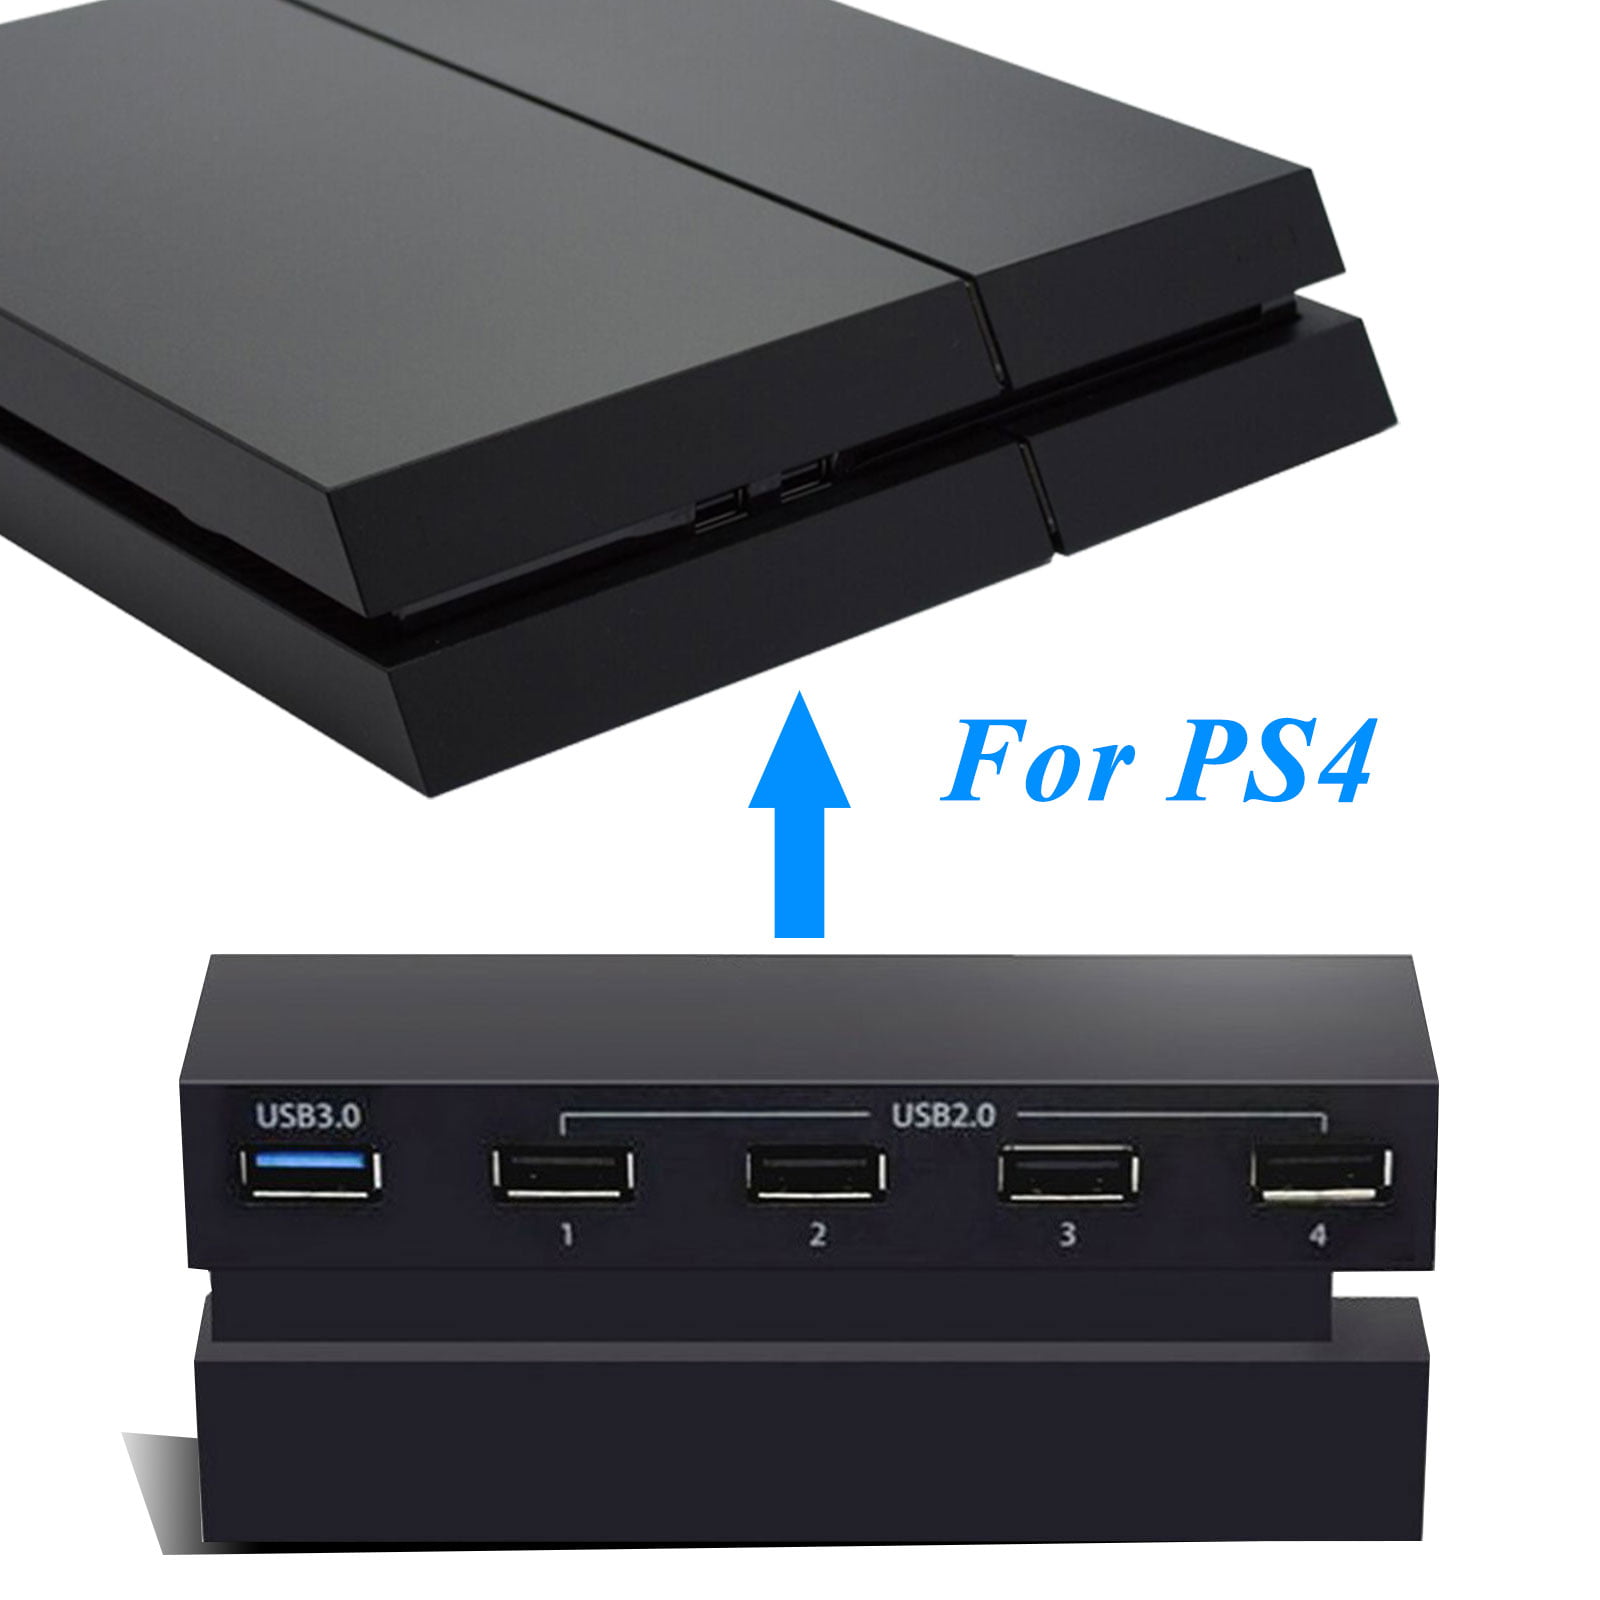 TSV 5 Port HUB for PS4, USB 3.0 High Speed Adapter Accessories ...